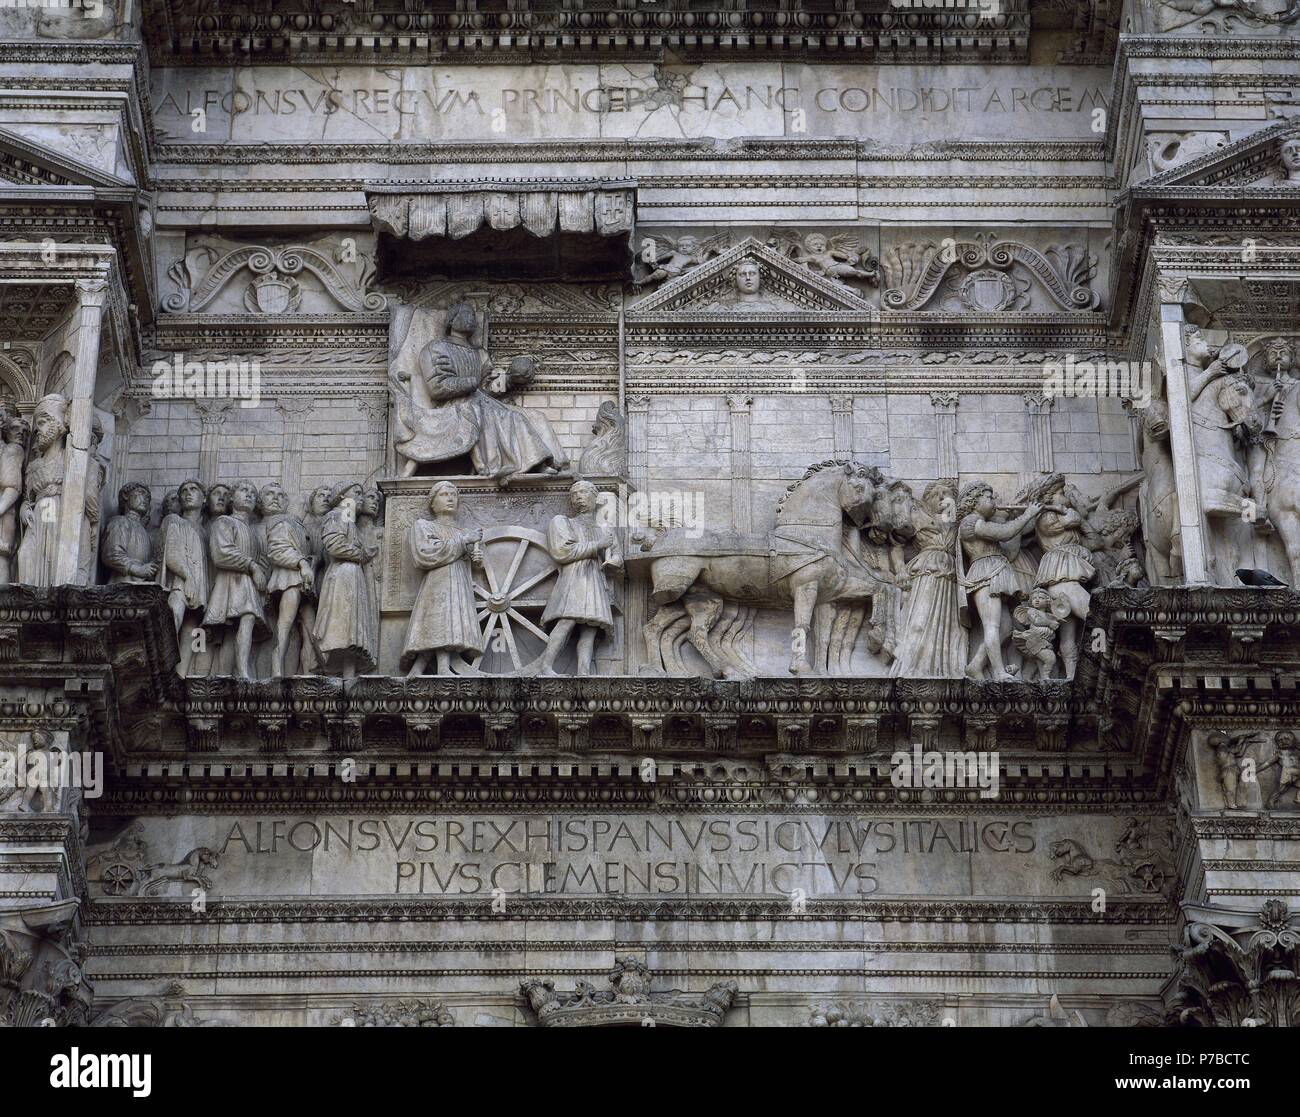 Alfonso V of Aragon (1396-1458). King of Aragon, Naples and Sicily. Detail of a triumphal arch depicting a quadriga carrying the king Alfonso V of Aragon (1396-1458) in their entrance to Naples, 1443. By Francesco Laurana (1430-1502), 1452-1456. Castel Nuovo. Naples. Italy. Stock Photo